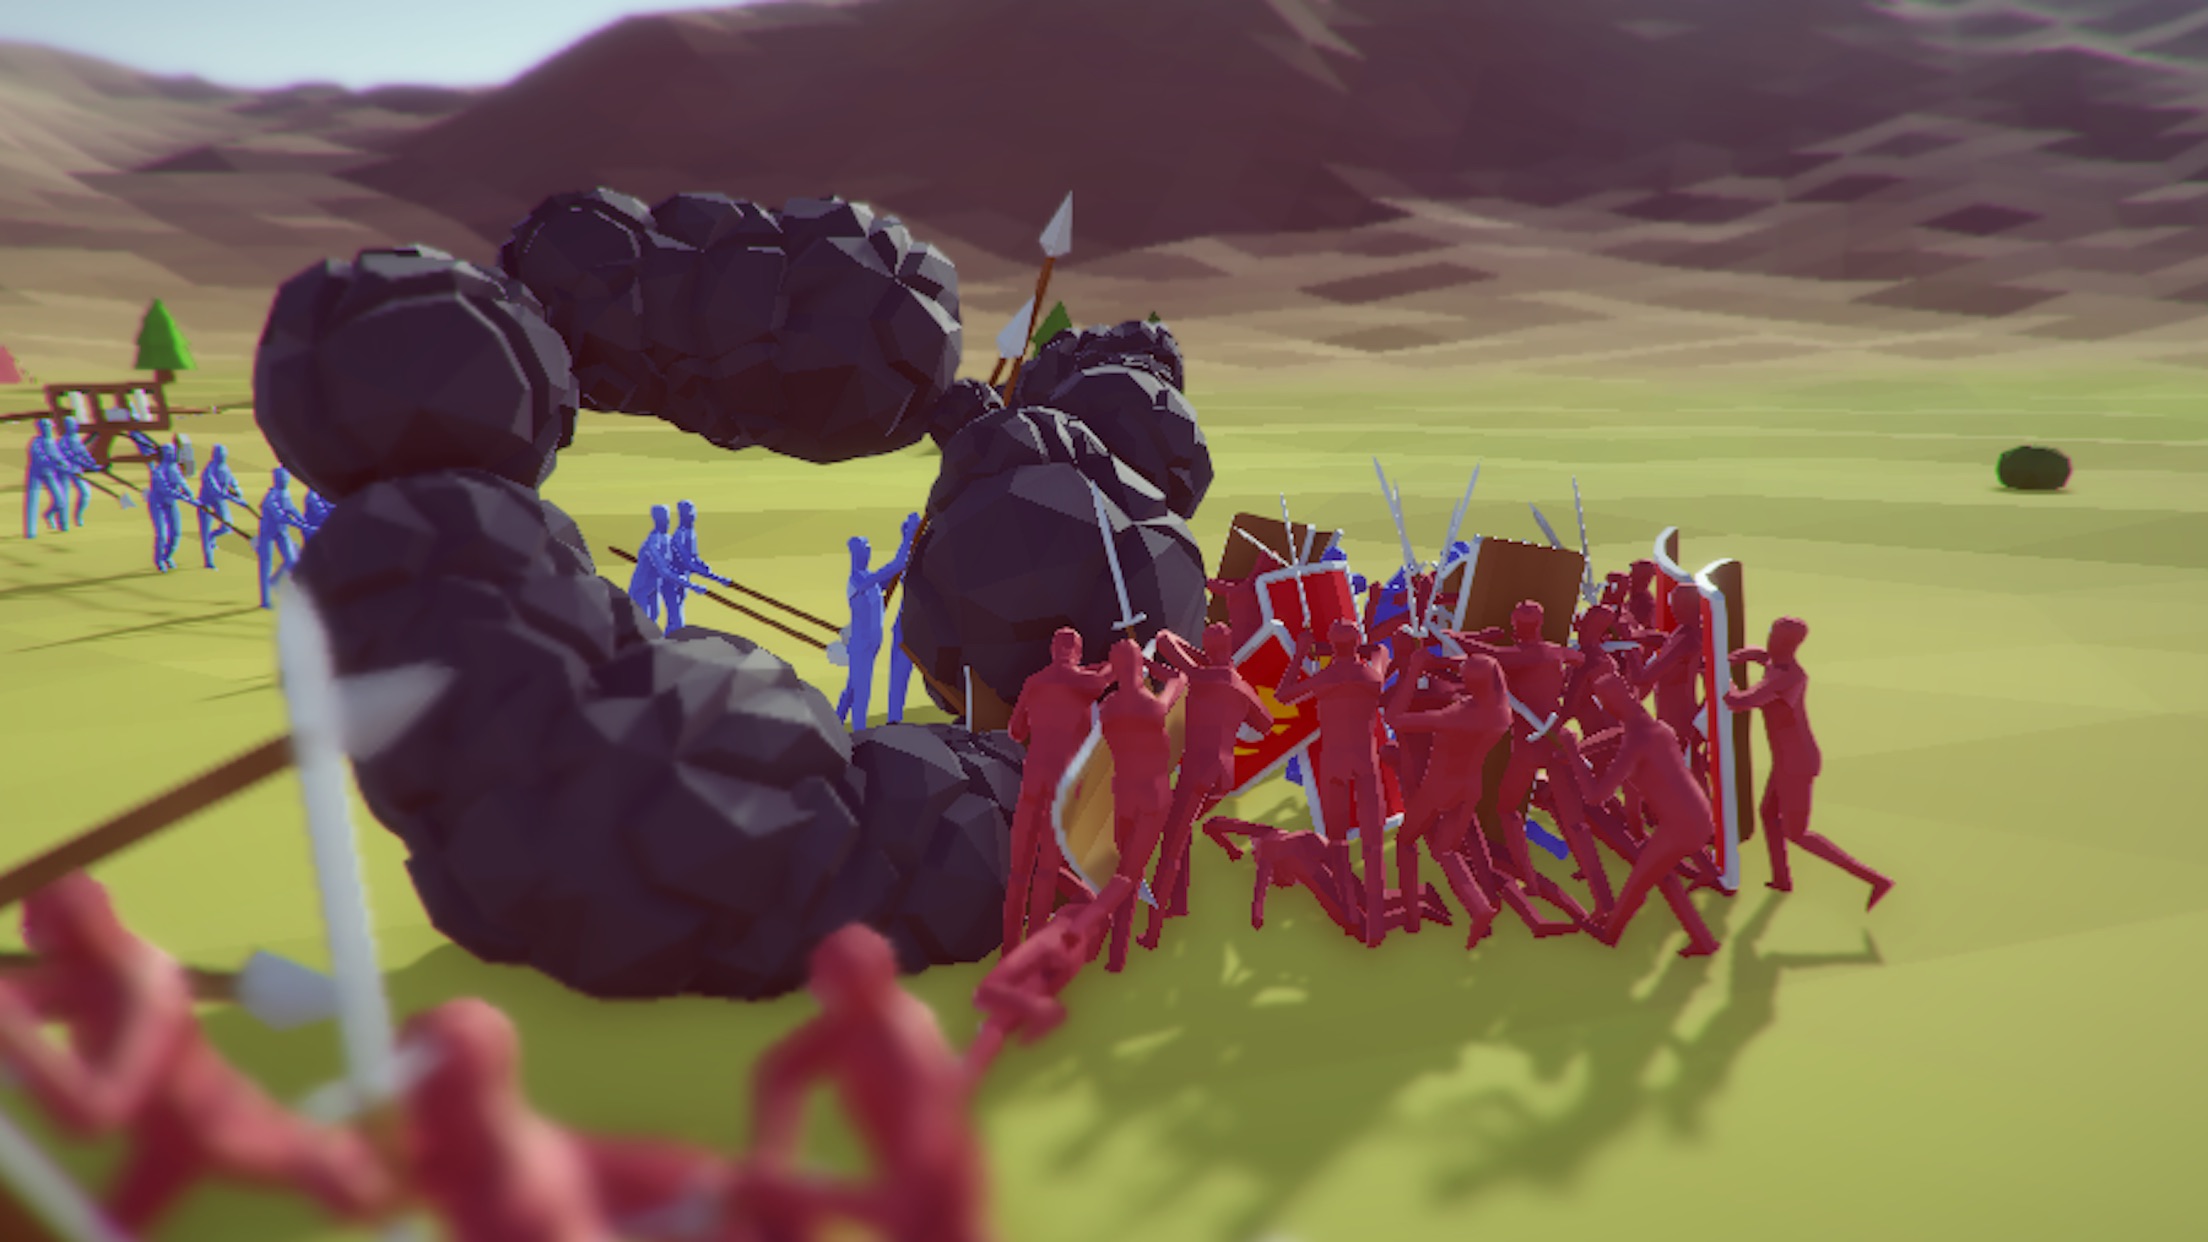 play totally accurate battle simulator play